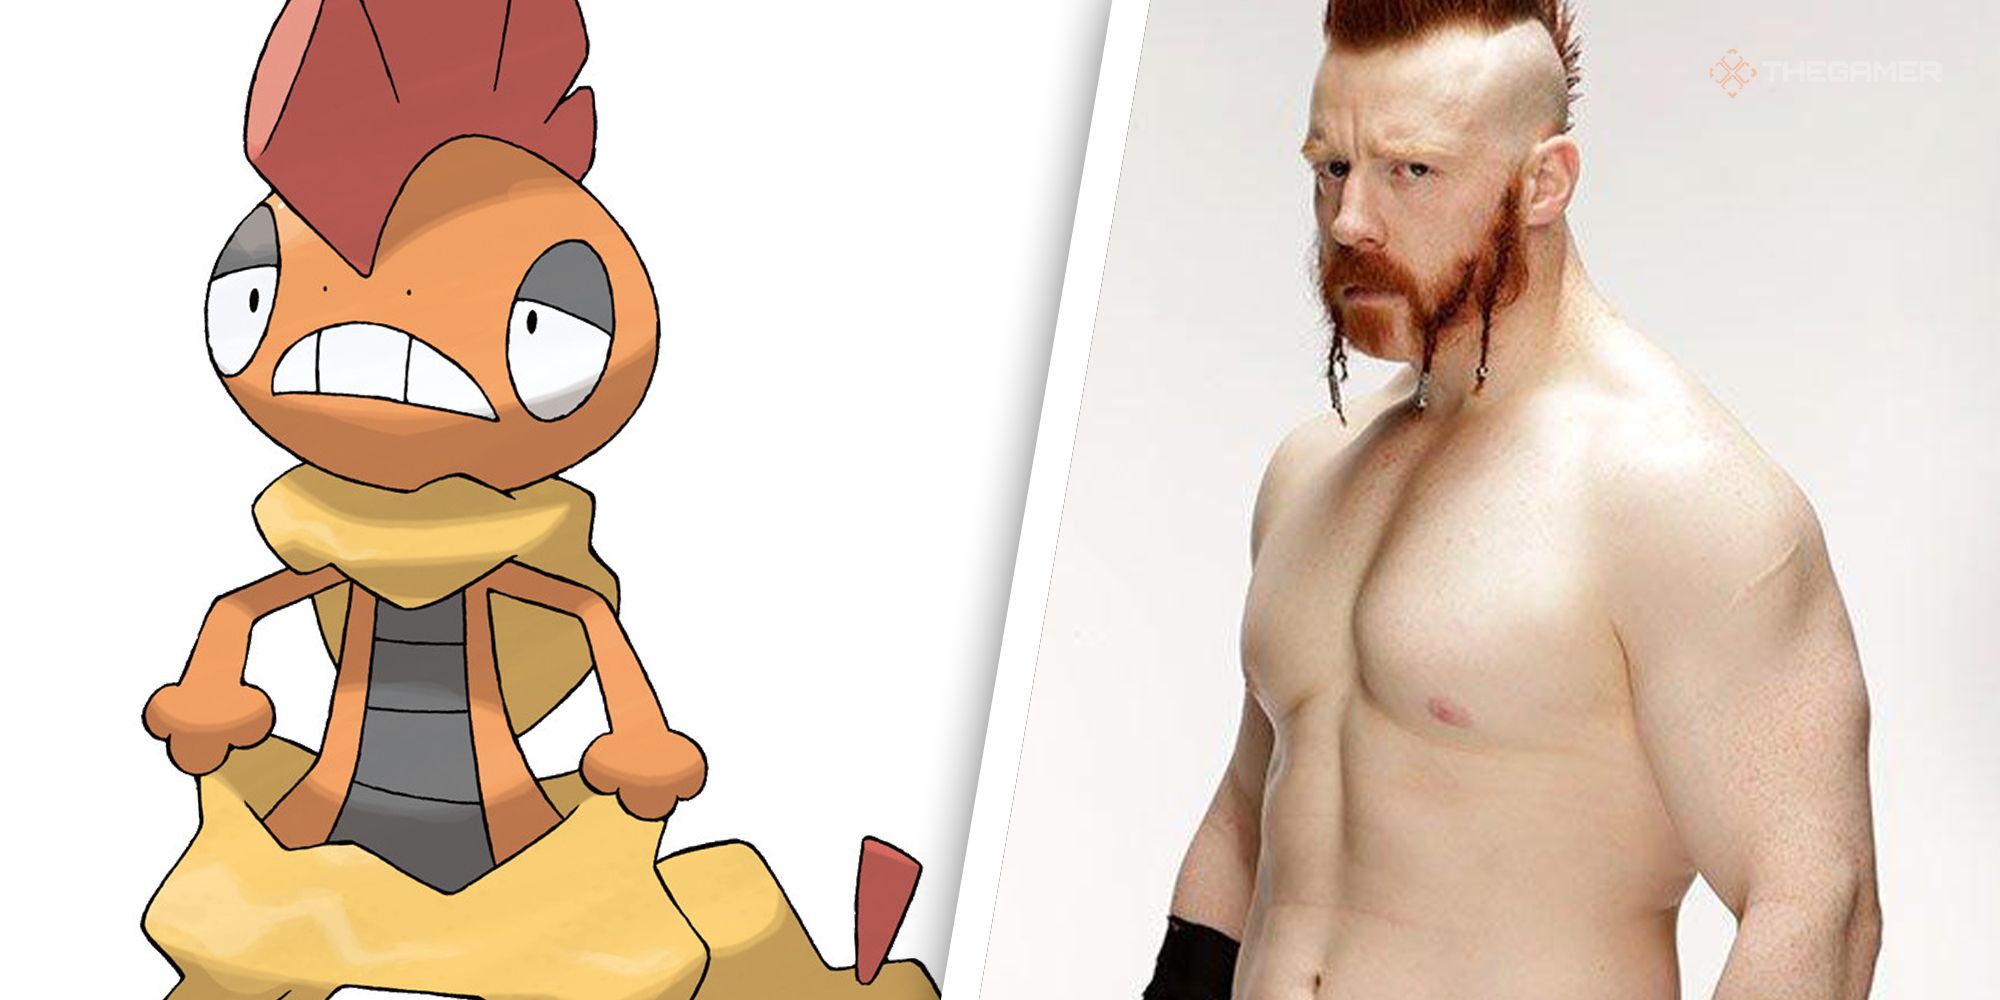 Heres 30 Wrestlers As Pokemon For The Royal Rumble (28)